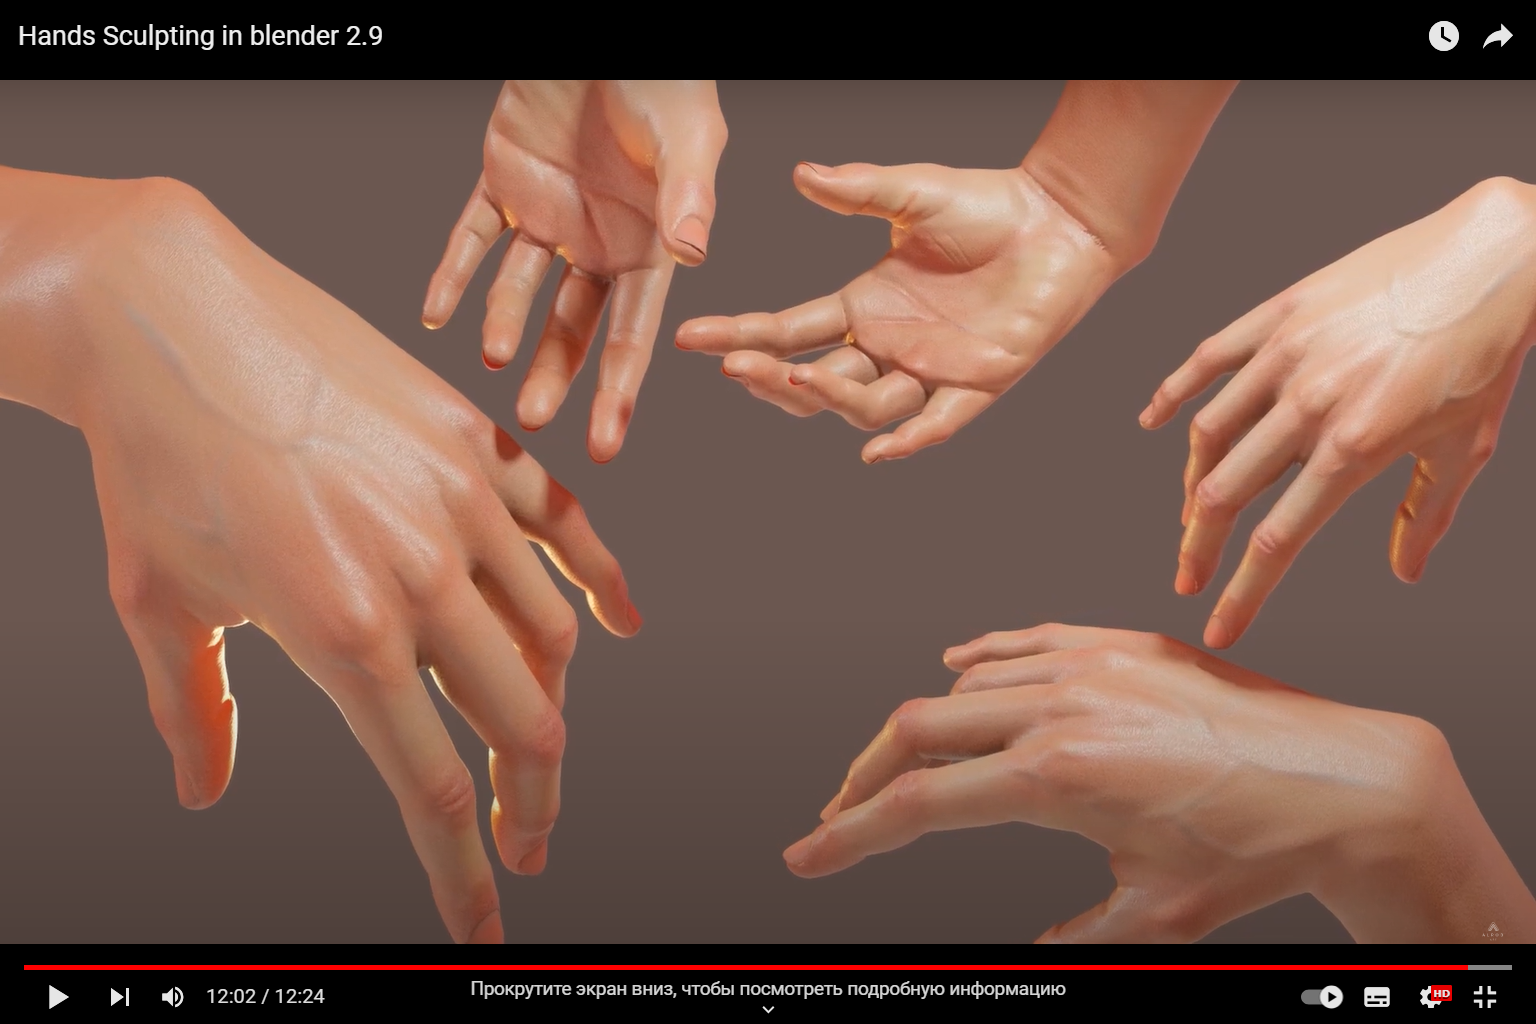 Different models of hands created in 3d model